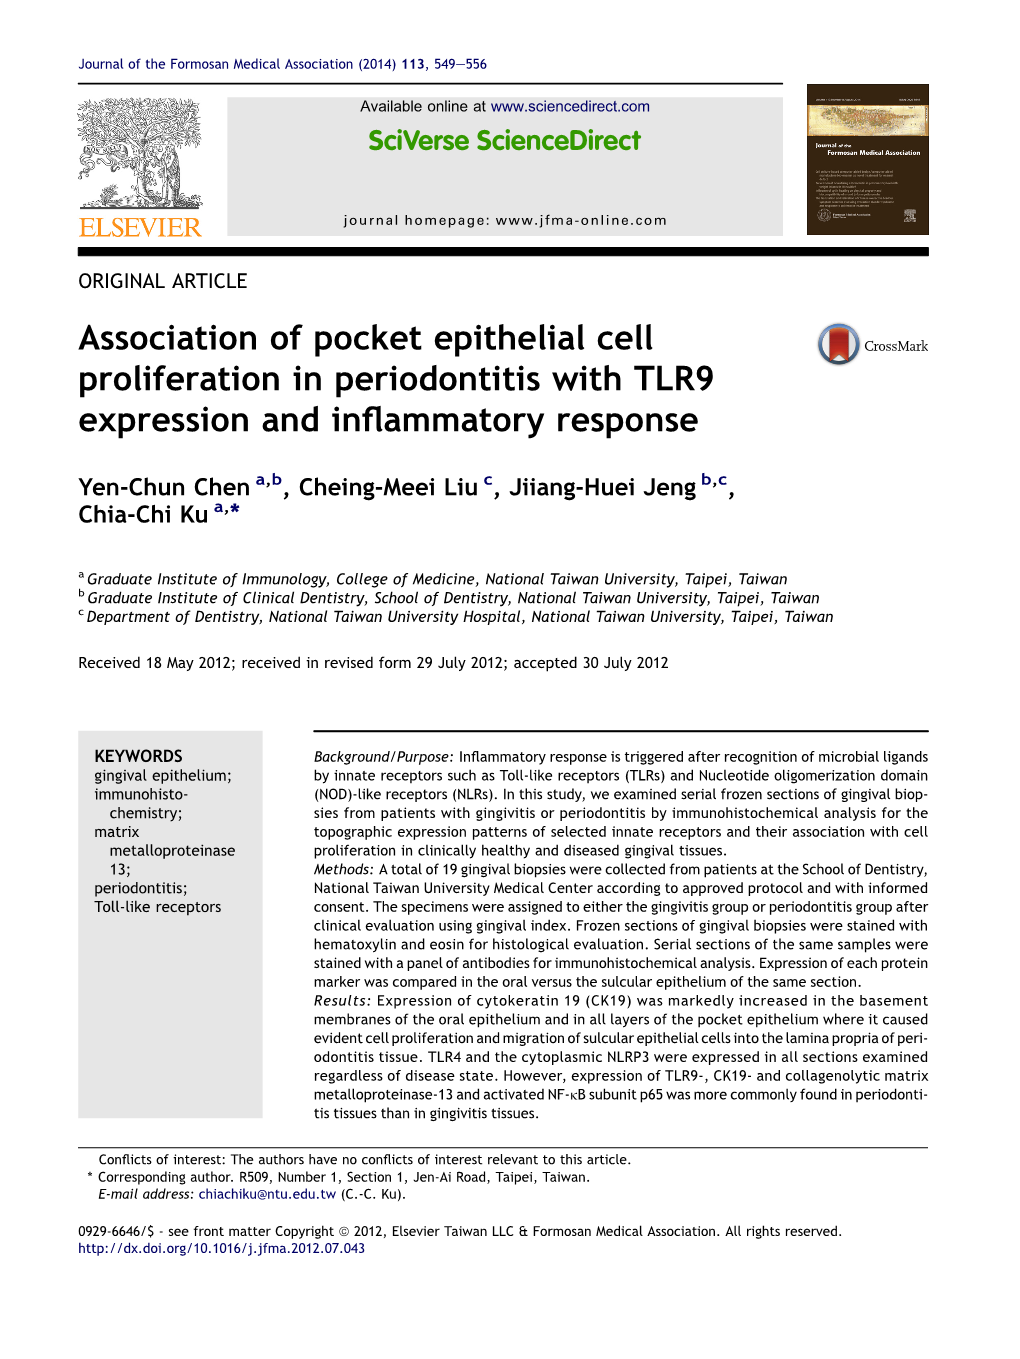 Association of Pocket Epithelial Cell Proliferation in Periodontitis with TLR9 Expression and Inﬂammatory Response